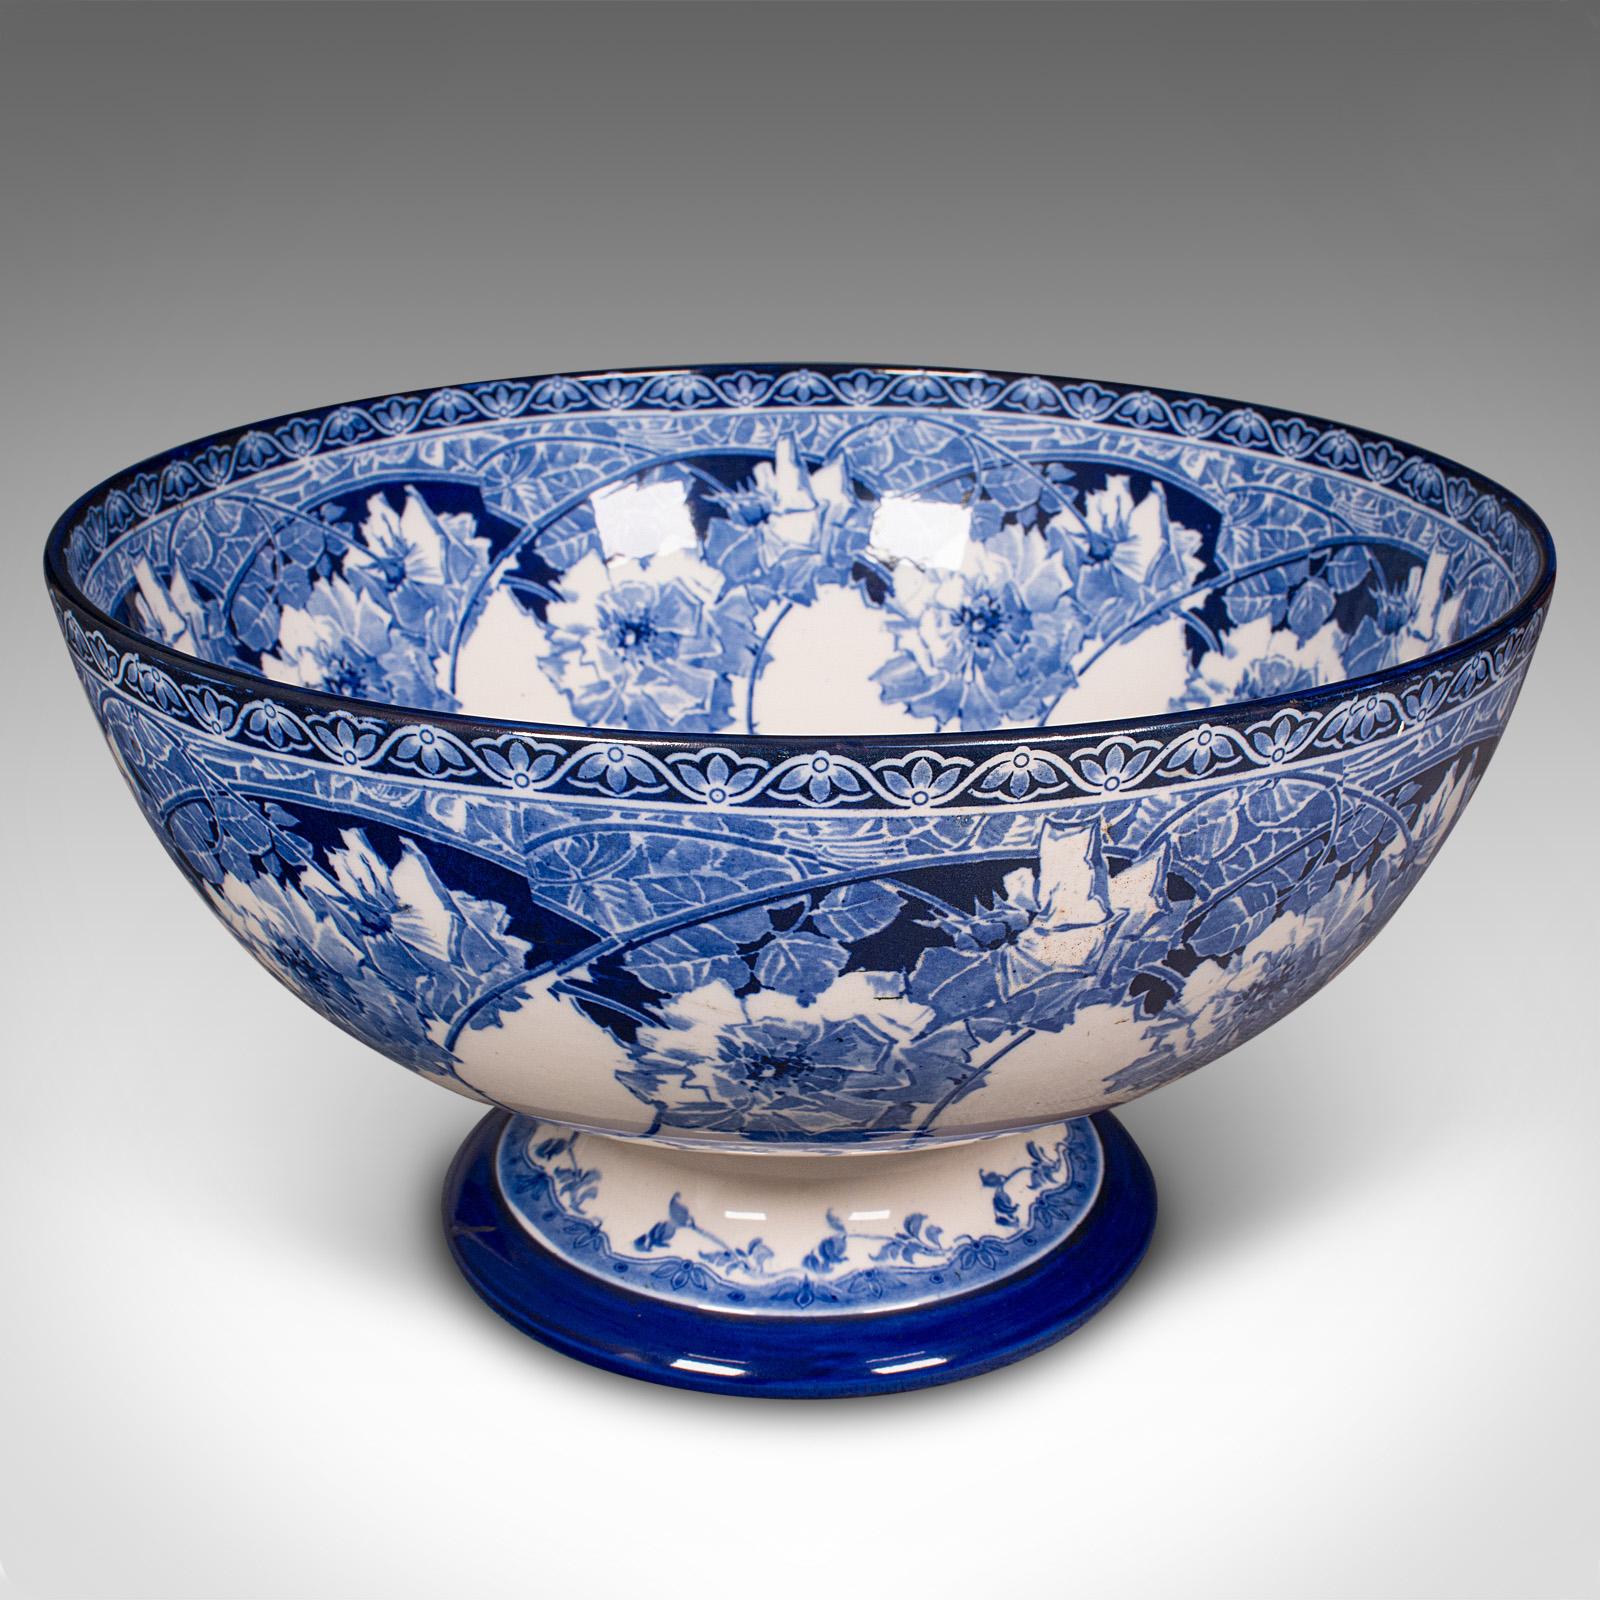 This is a large antique celebration fruit bowl. An English, ceramic footed serving dish, dating to the early 20th century, circa 1920.

Fascinatingly generous proportion with attractive blue decor
Displays a desirable aged patina and in good order